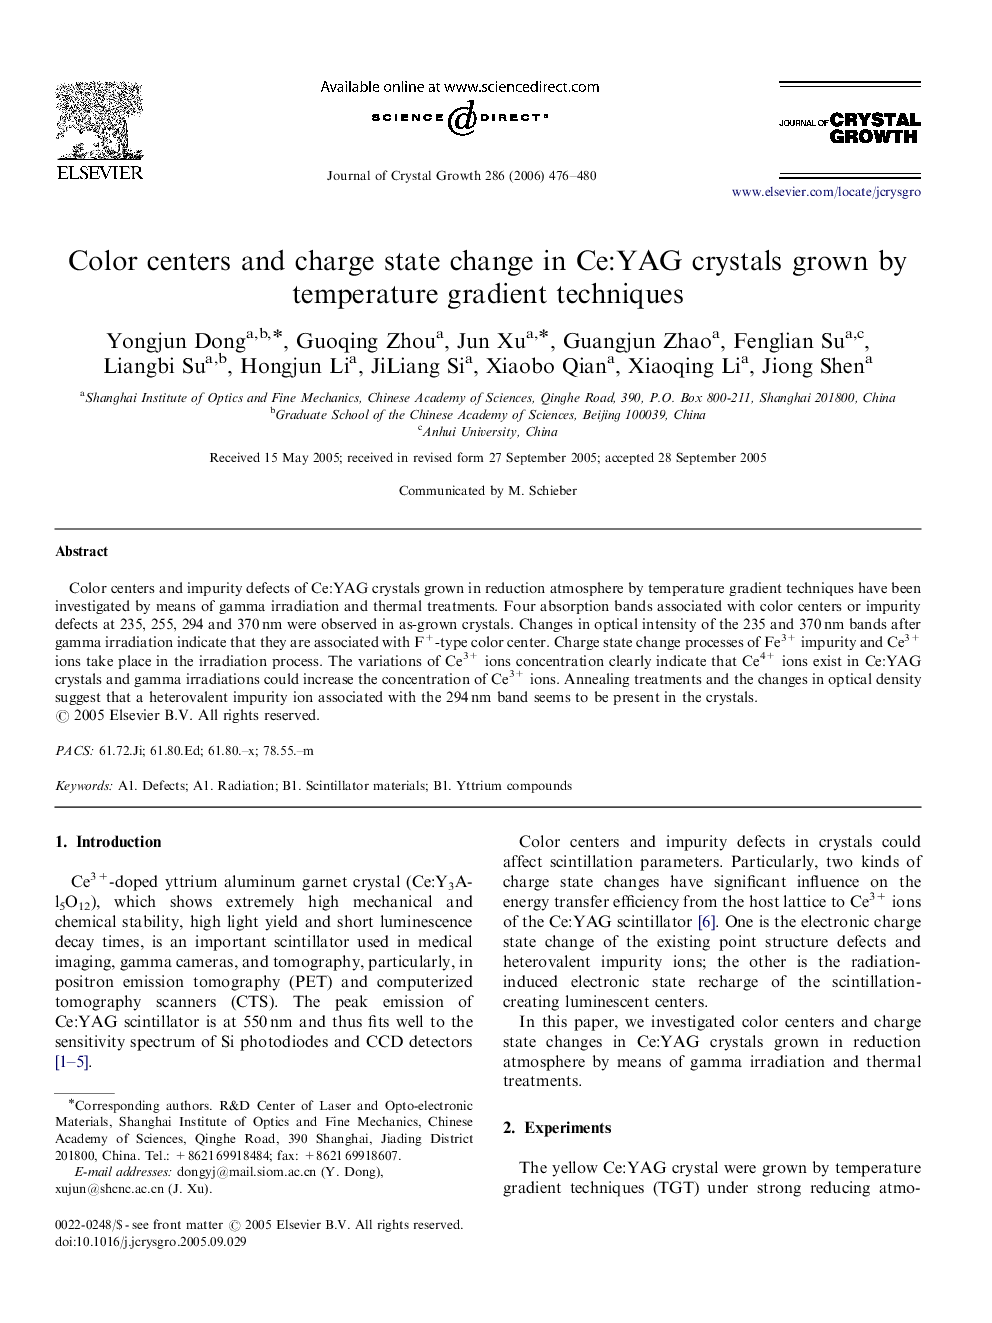 Color centers and charge state change in Ce:YAG crystals grown by temperature gradient techniques